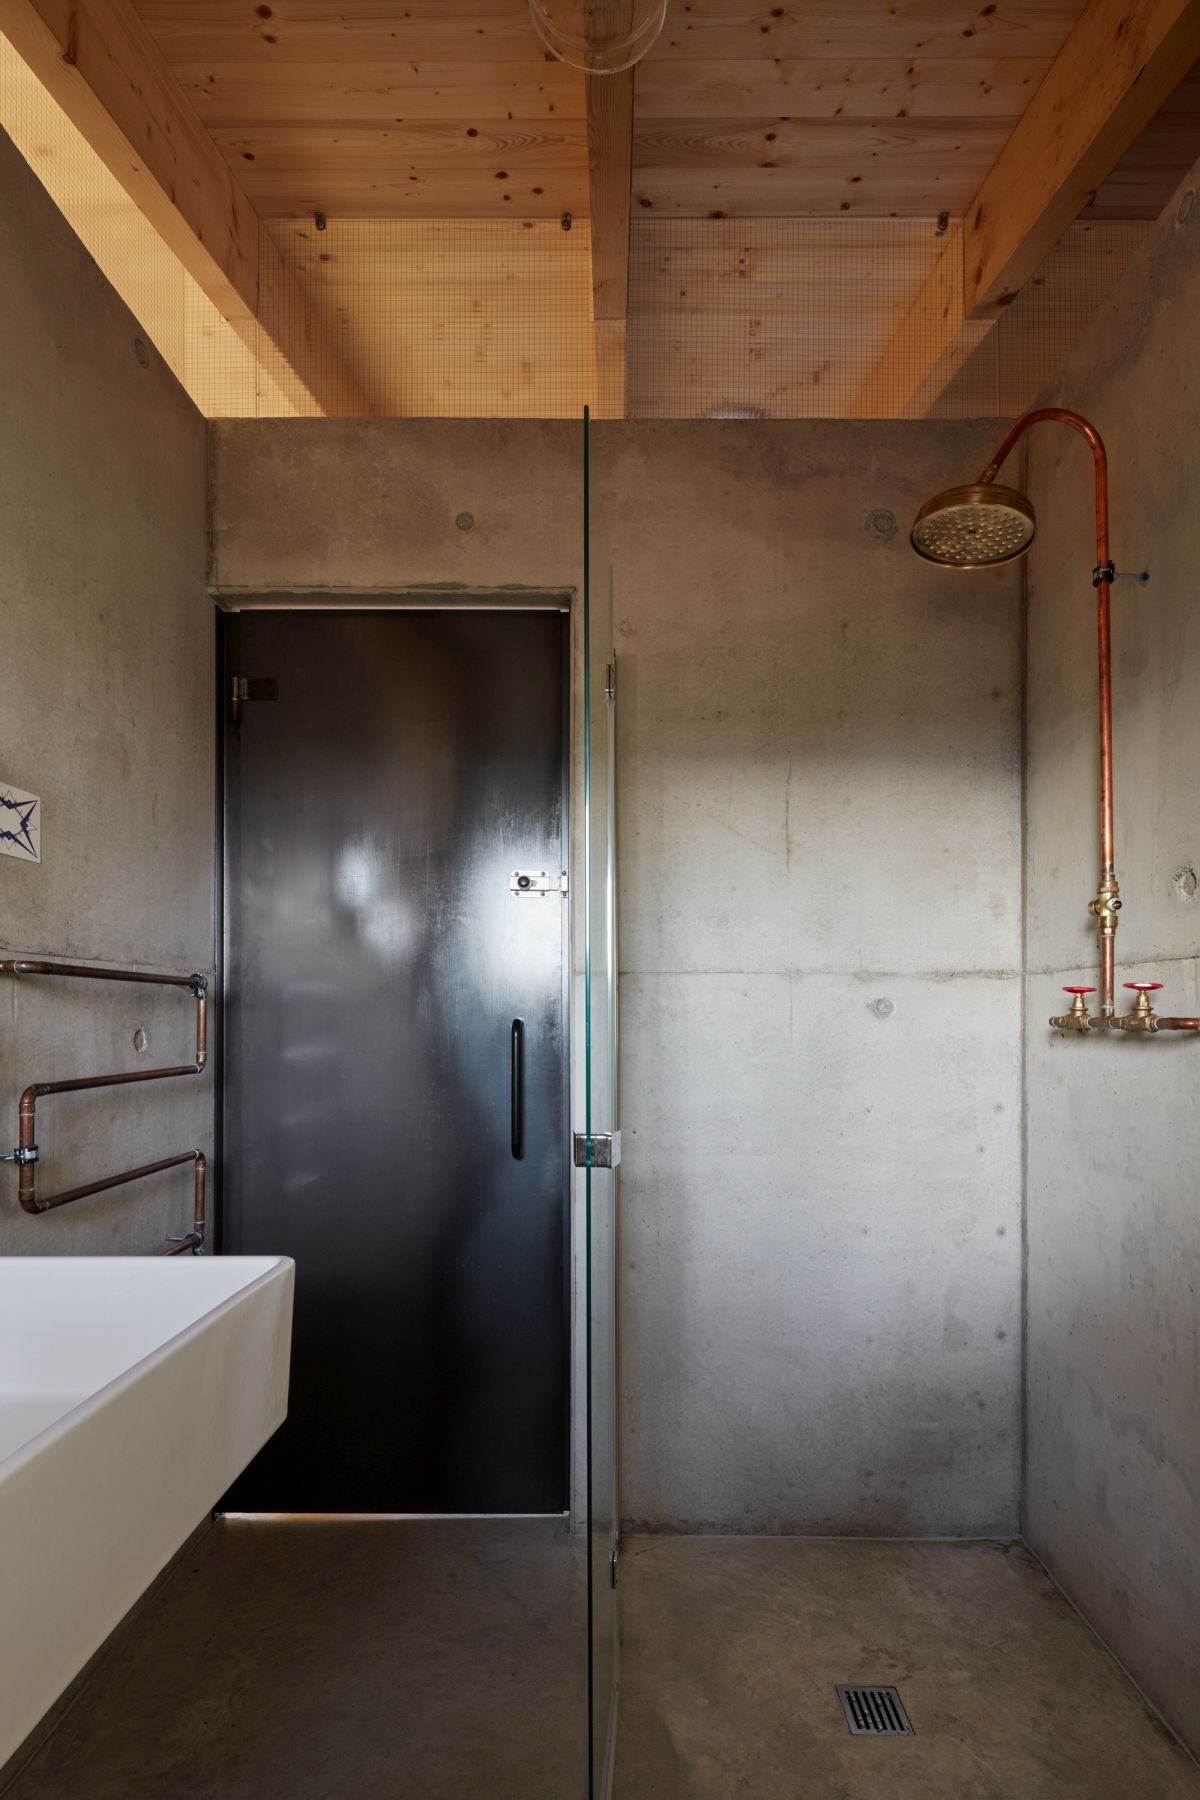 There's definitely a stronger industrial vibe in spaces like this bathroom compared to some of the other rooms